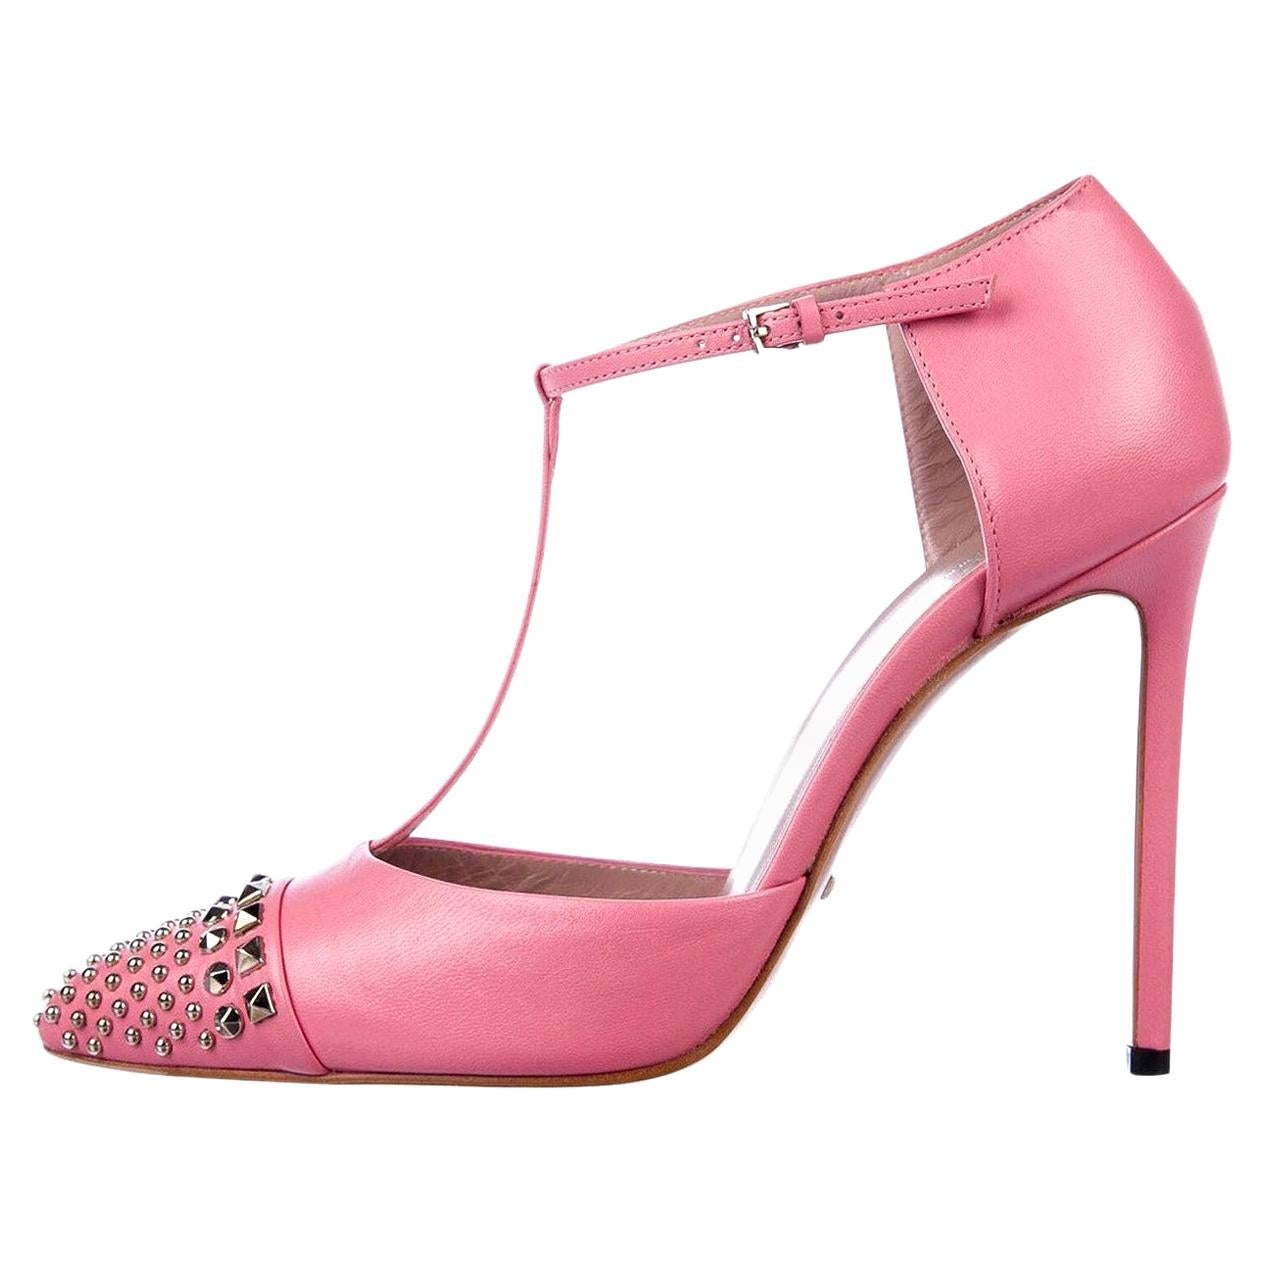 New Gucci Absolutely Stunning Pink Studded Heels Pumps Sz 39